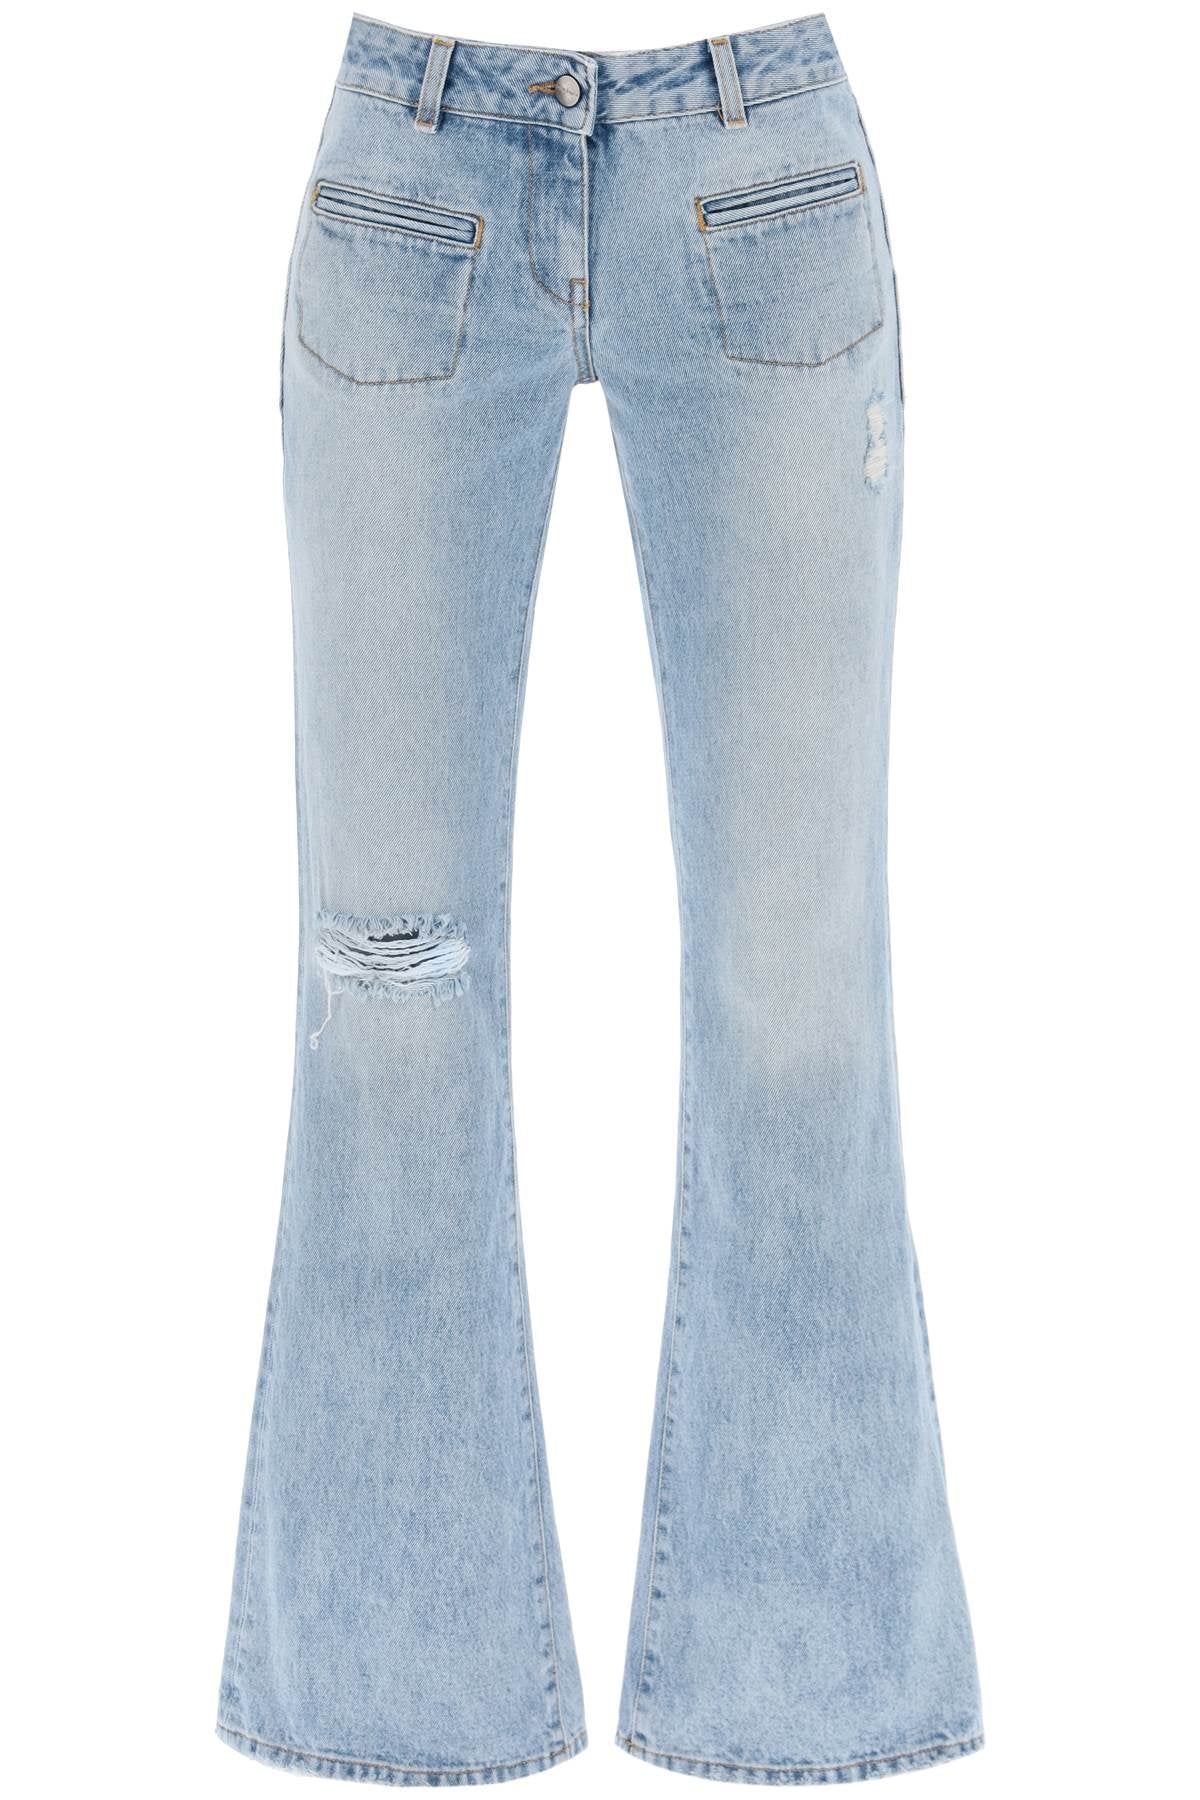 Palm angels low-rise waist bootcut jeans-0